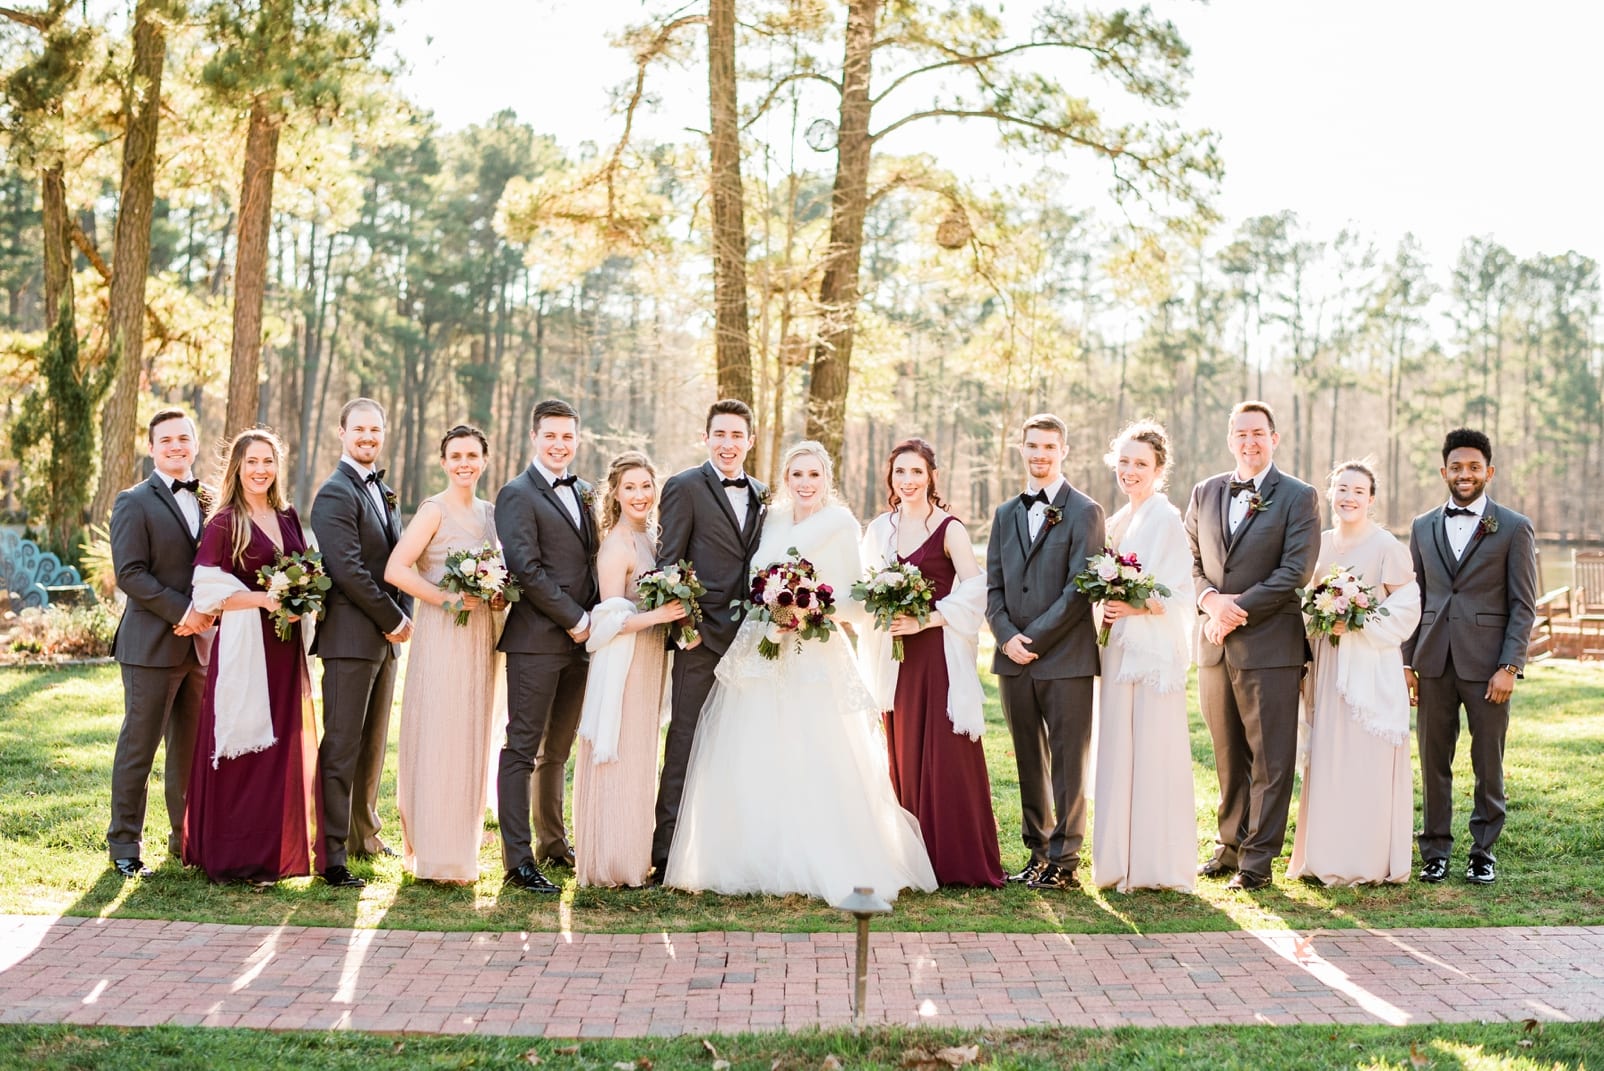 Angus Barn bride and groom with wedding party in front of brick path photo